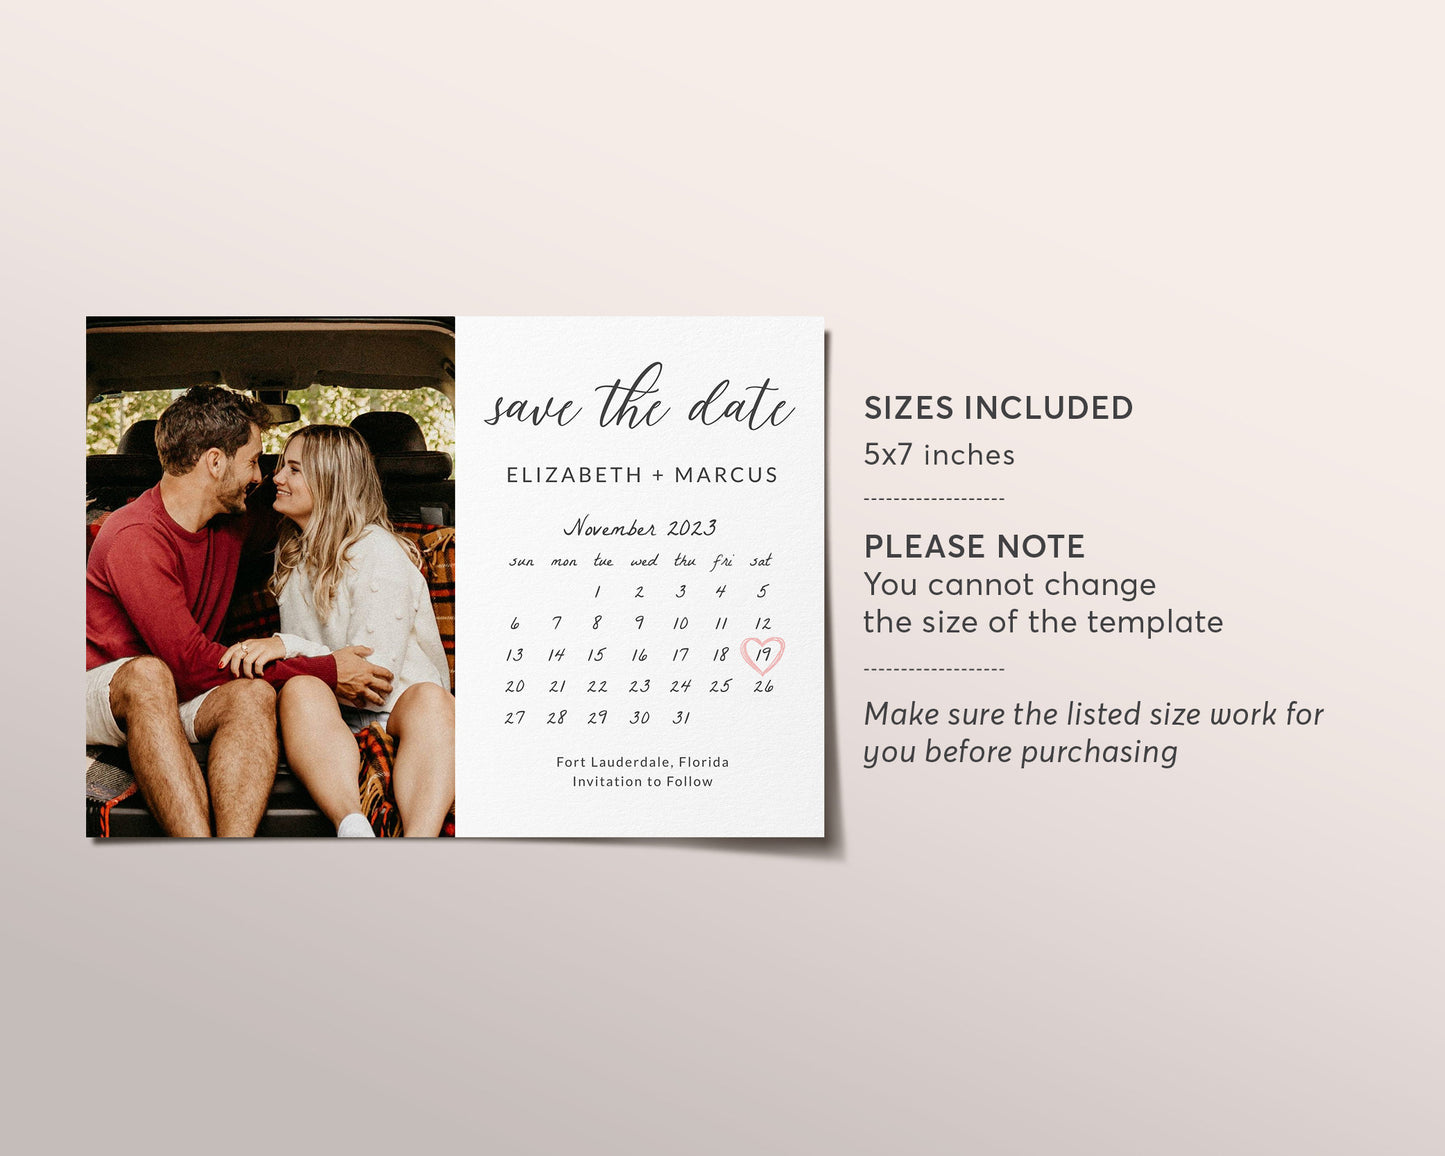 Calendar Save the Date Editable Template With Photo, Simple Minimalistic Modern Invitation, Marker Save Our Date Invite Printable